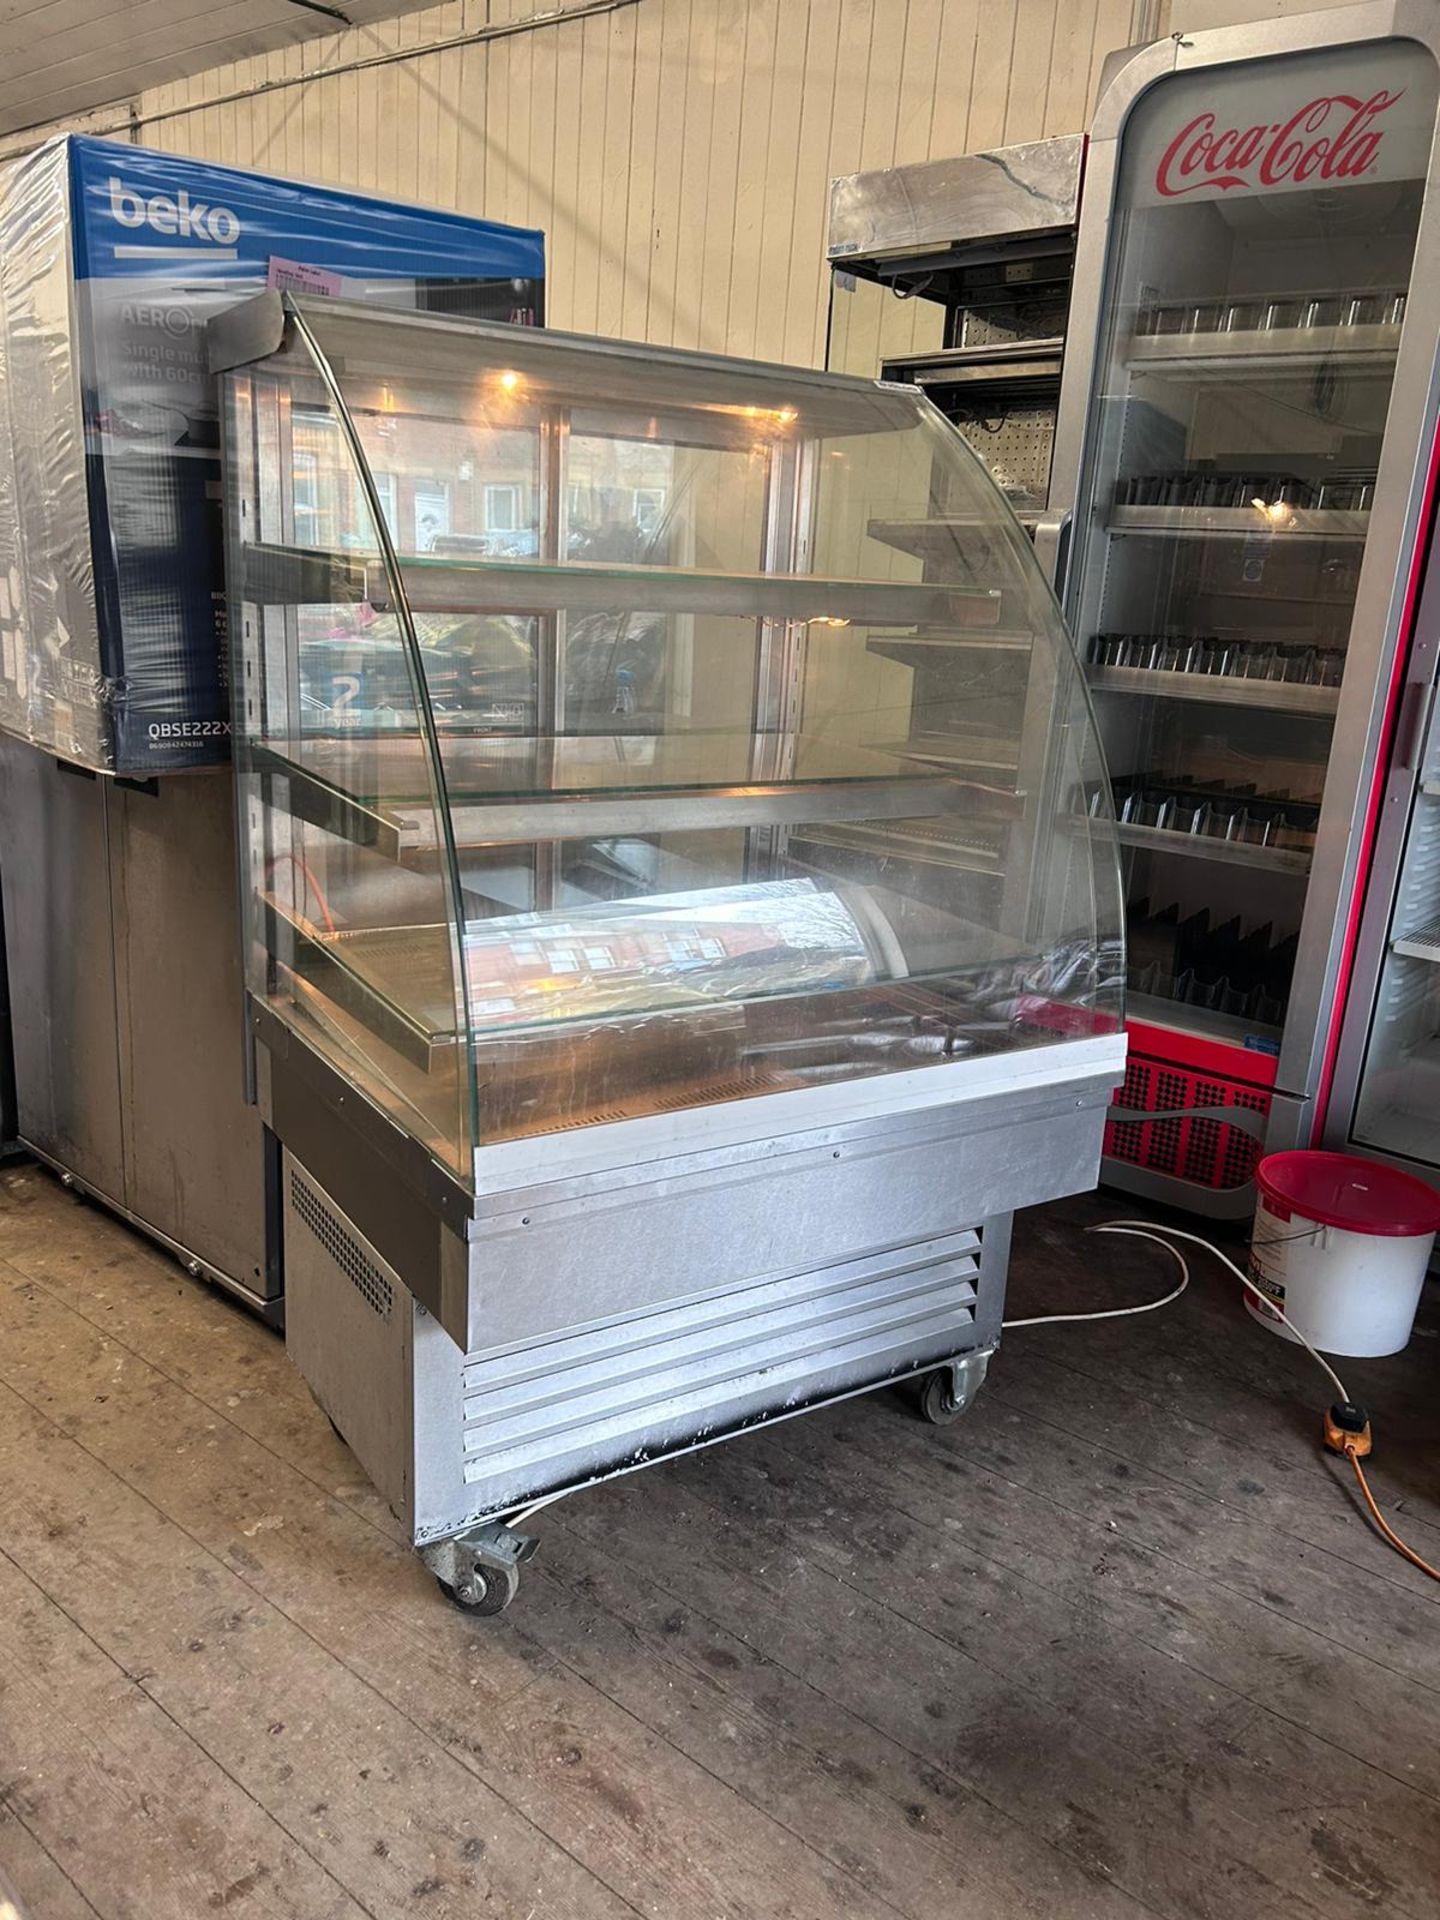 TRUE 2 DRAWER FRIDGE WITH SALAD BAR - ALMOST NEW CONDITION - FULL WORKING CONDITION